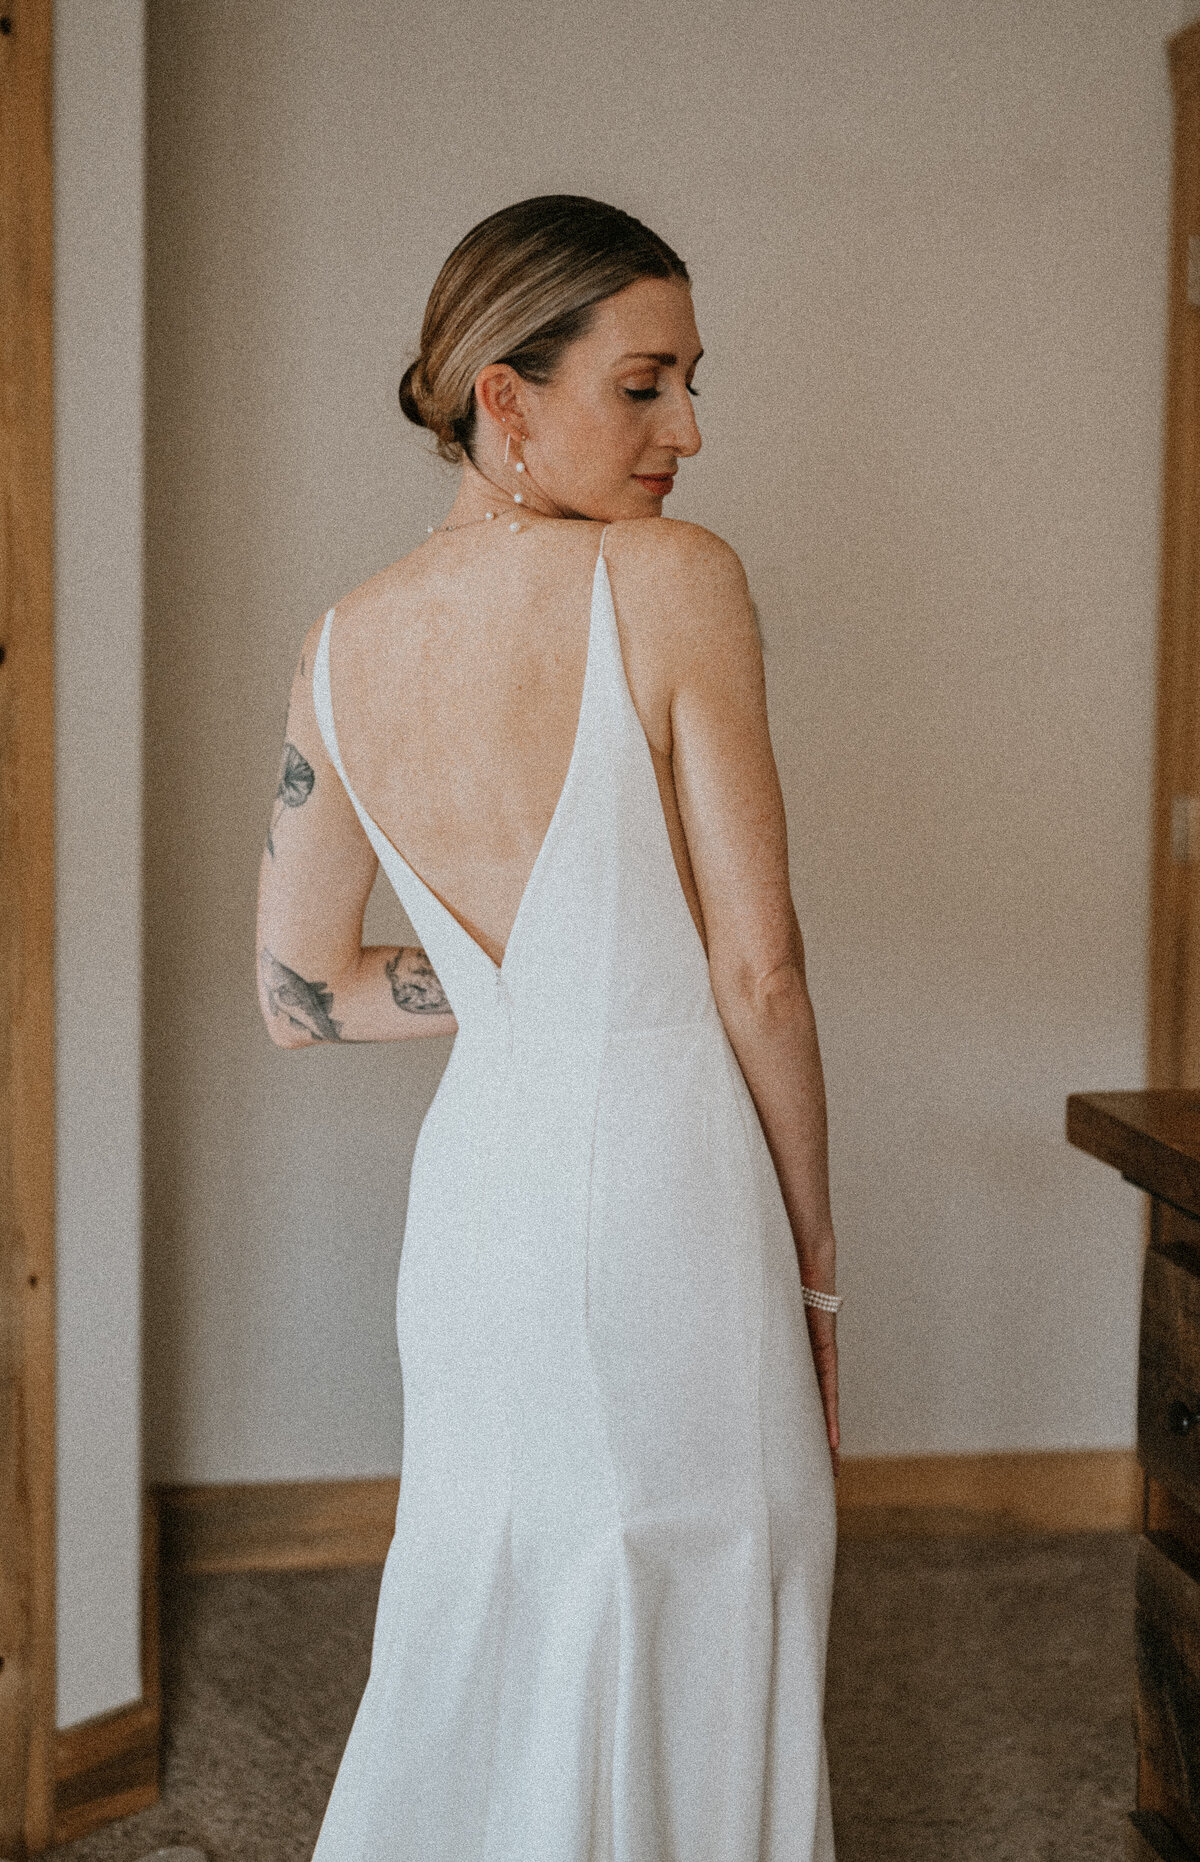 Wedding dress bridal and spa nontraditional, veil, destination, elopement in Wyoming near Yellowstone